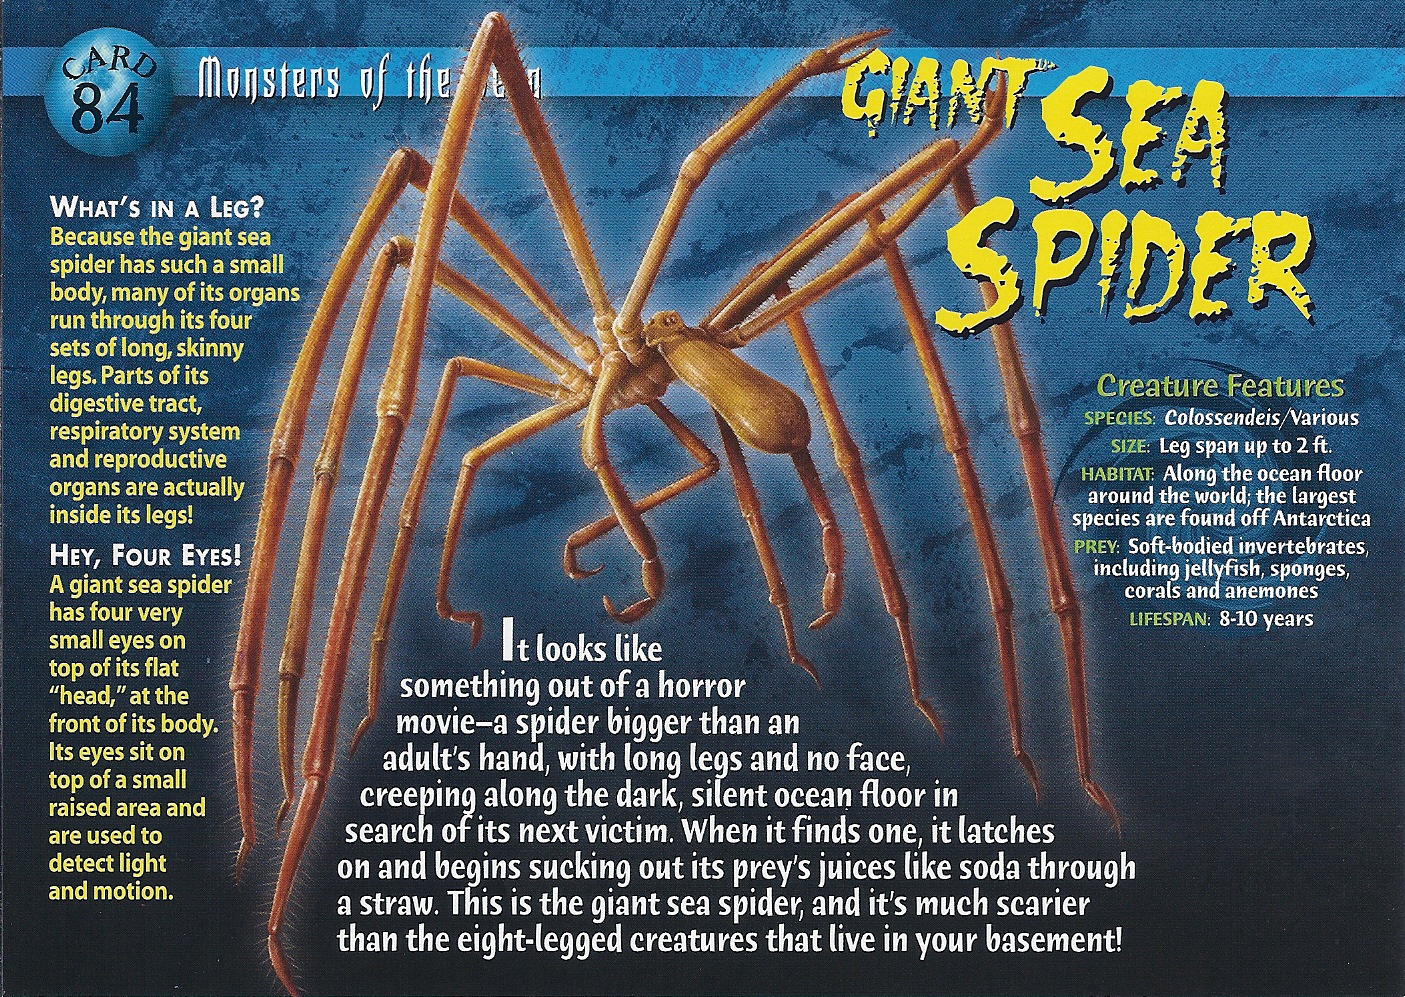 https://static.wikia.nocookie.net/wierdnwildcreatures/images/0/06/Giant_Sea_Spider_front.jpg/revision/latest?cb=20130912020618